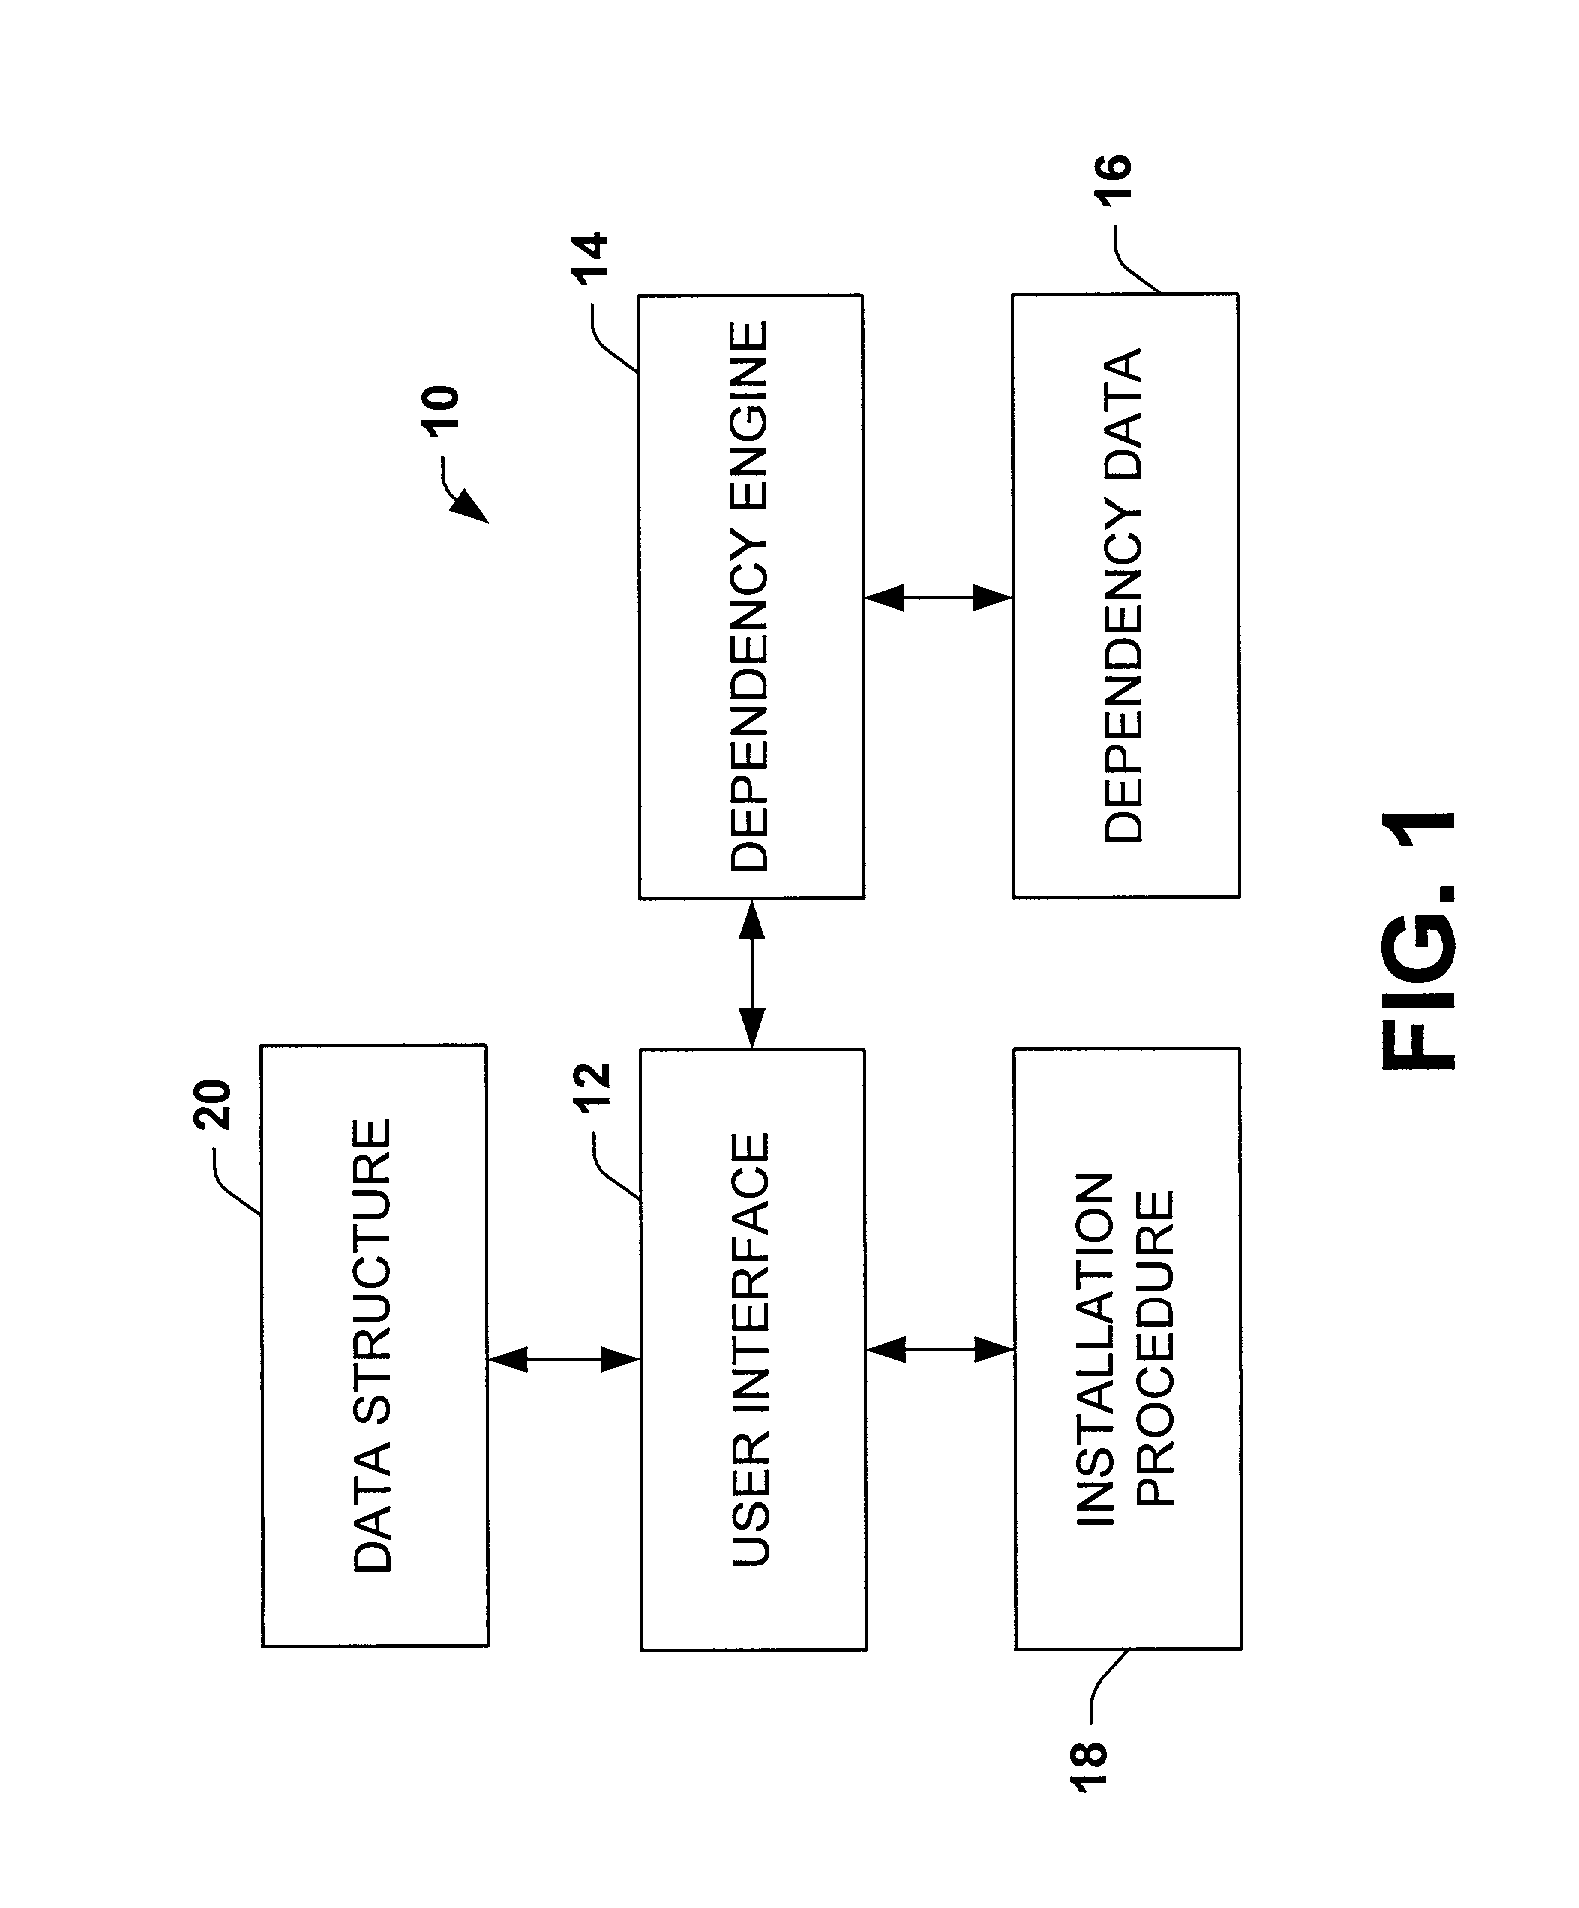 System and method to facilitate installation of components across one or more computers